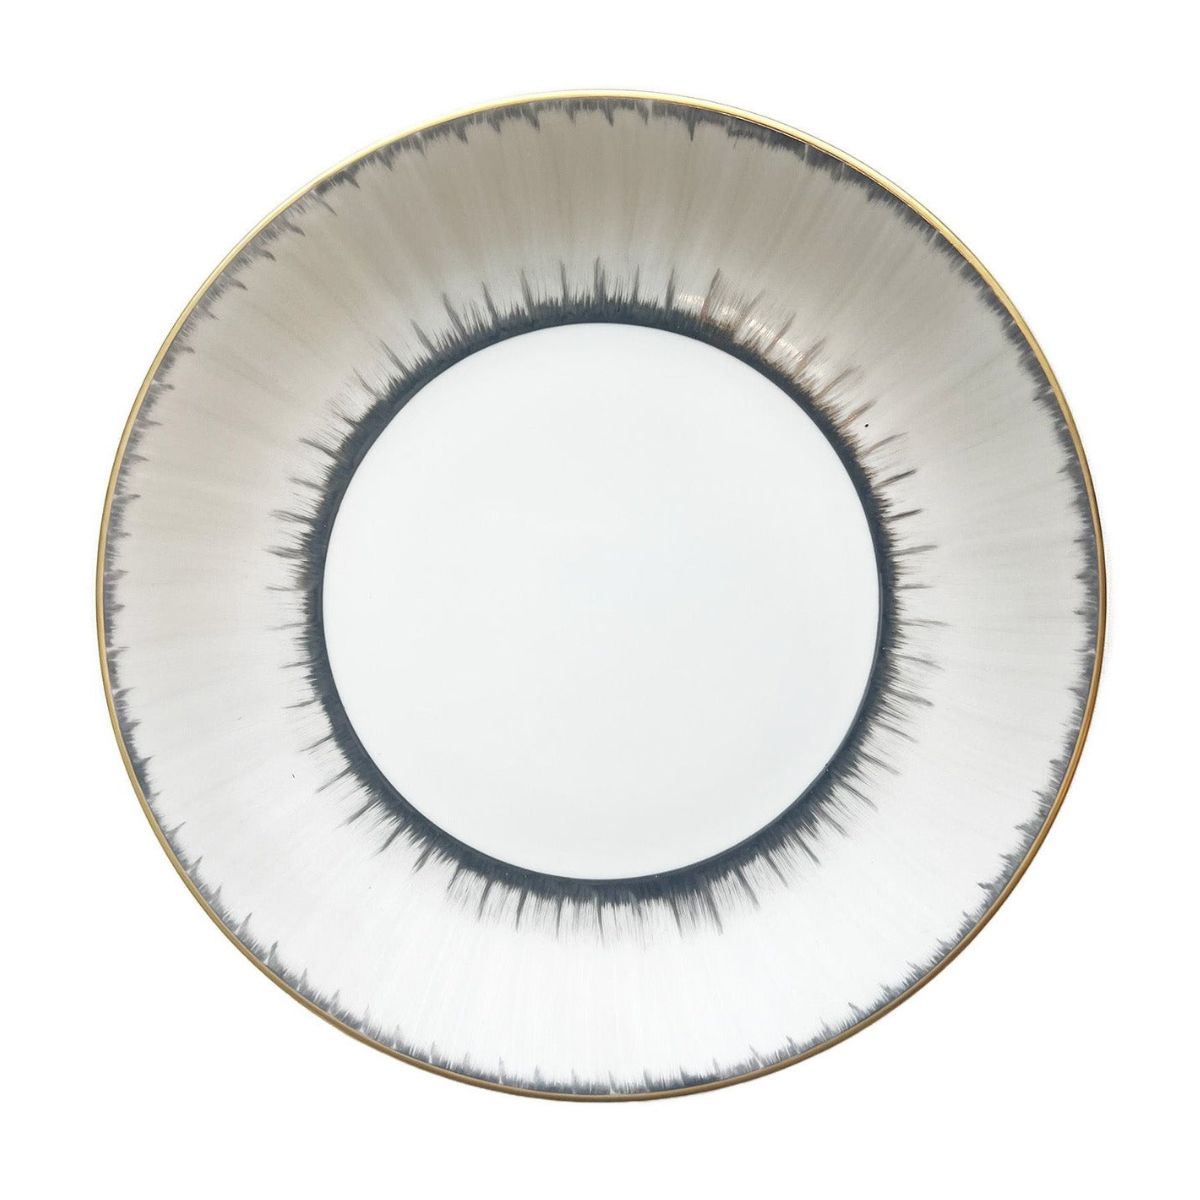 Marie Daâge Ruban 1 Coupe Dinner Plate, Silver & Taupe-Bespoke Designs